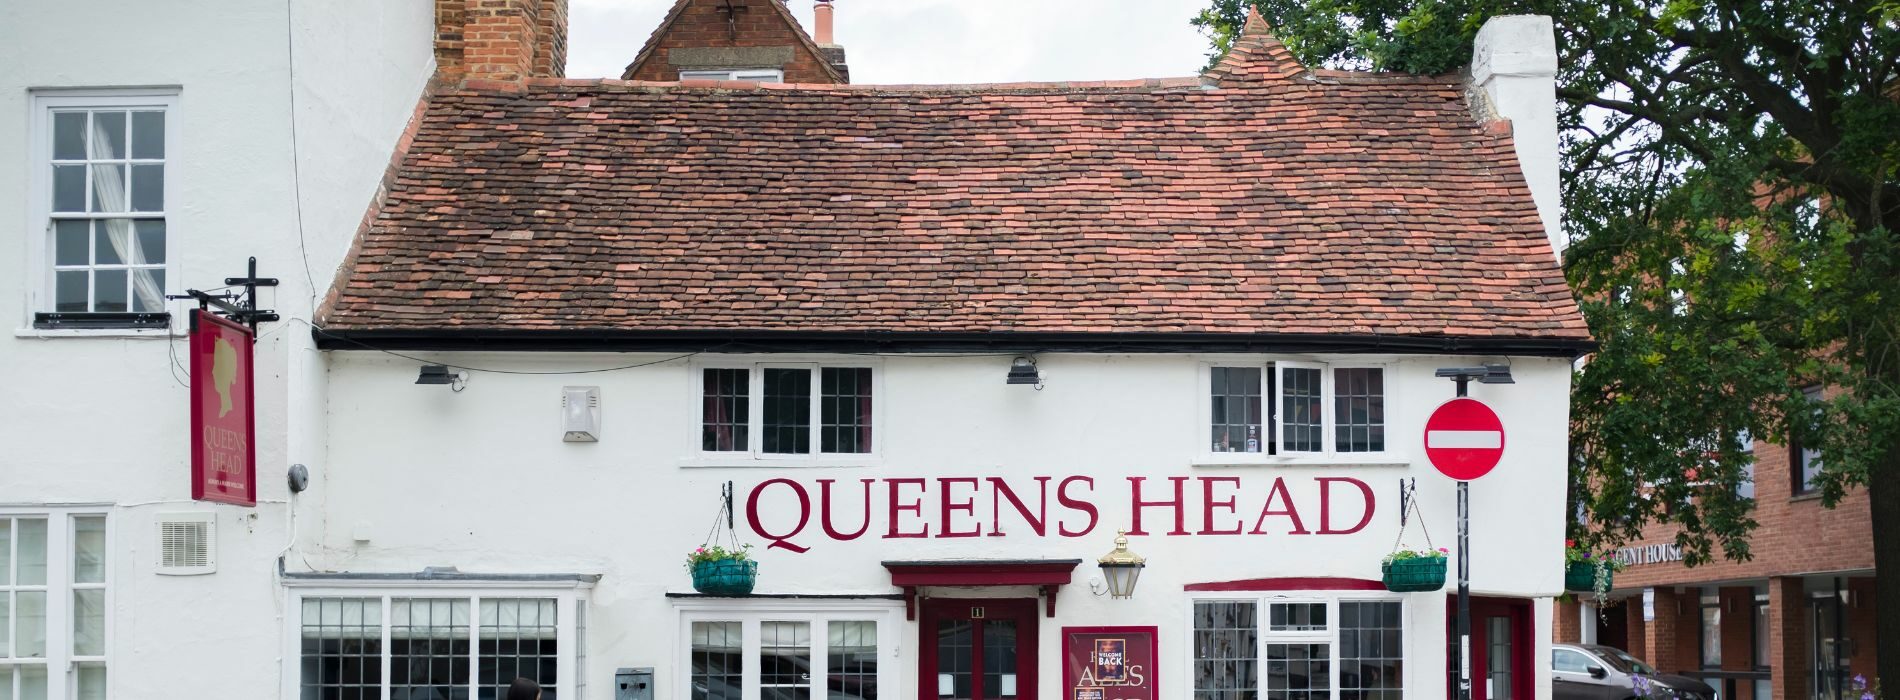 A white wooden-floored building in Aylesbury, HP21, features a prominent red sign displaying "Queen's Head," adding a touch of character to the establishment.